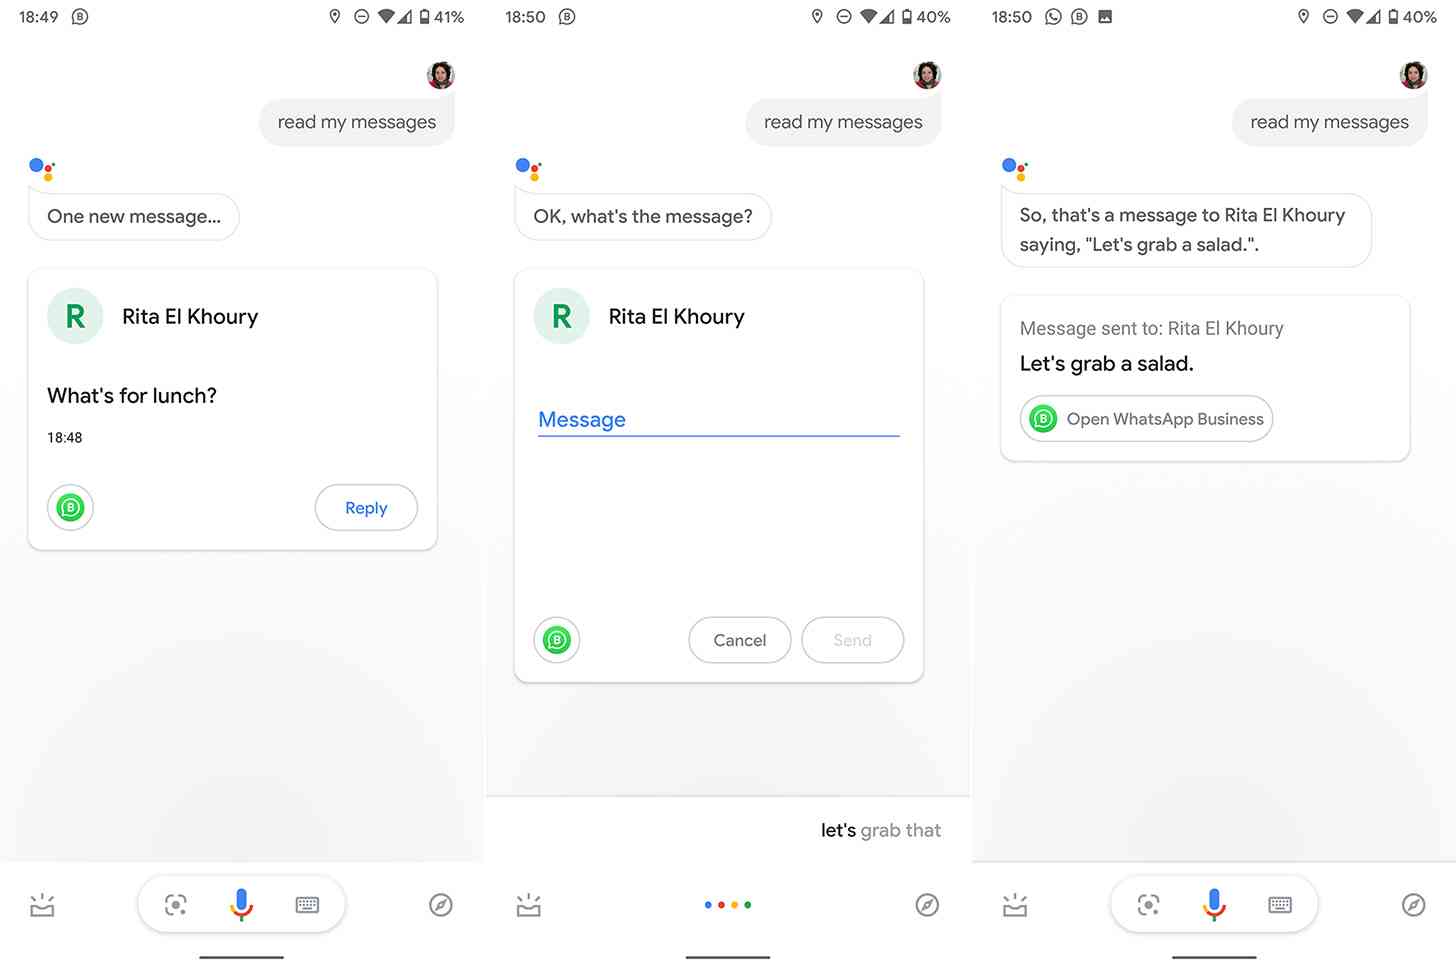 Google Assistant read third-party messages